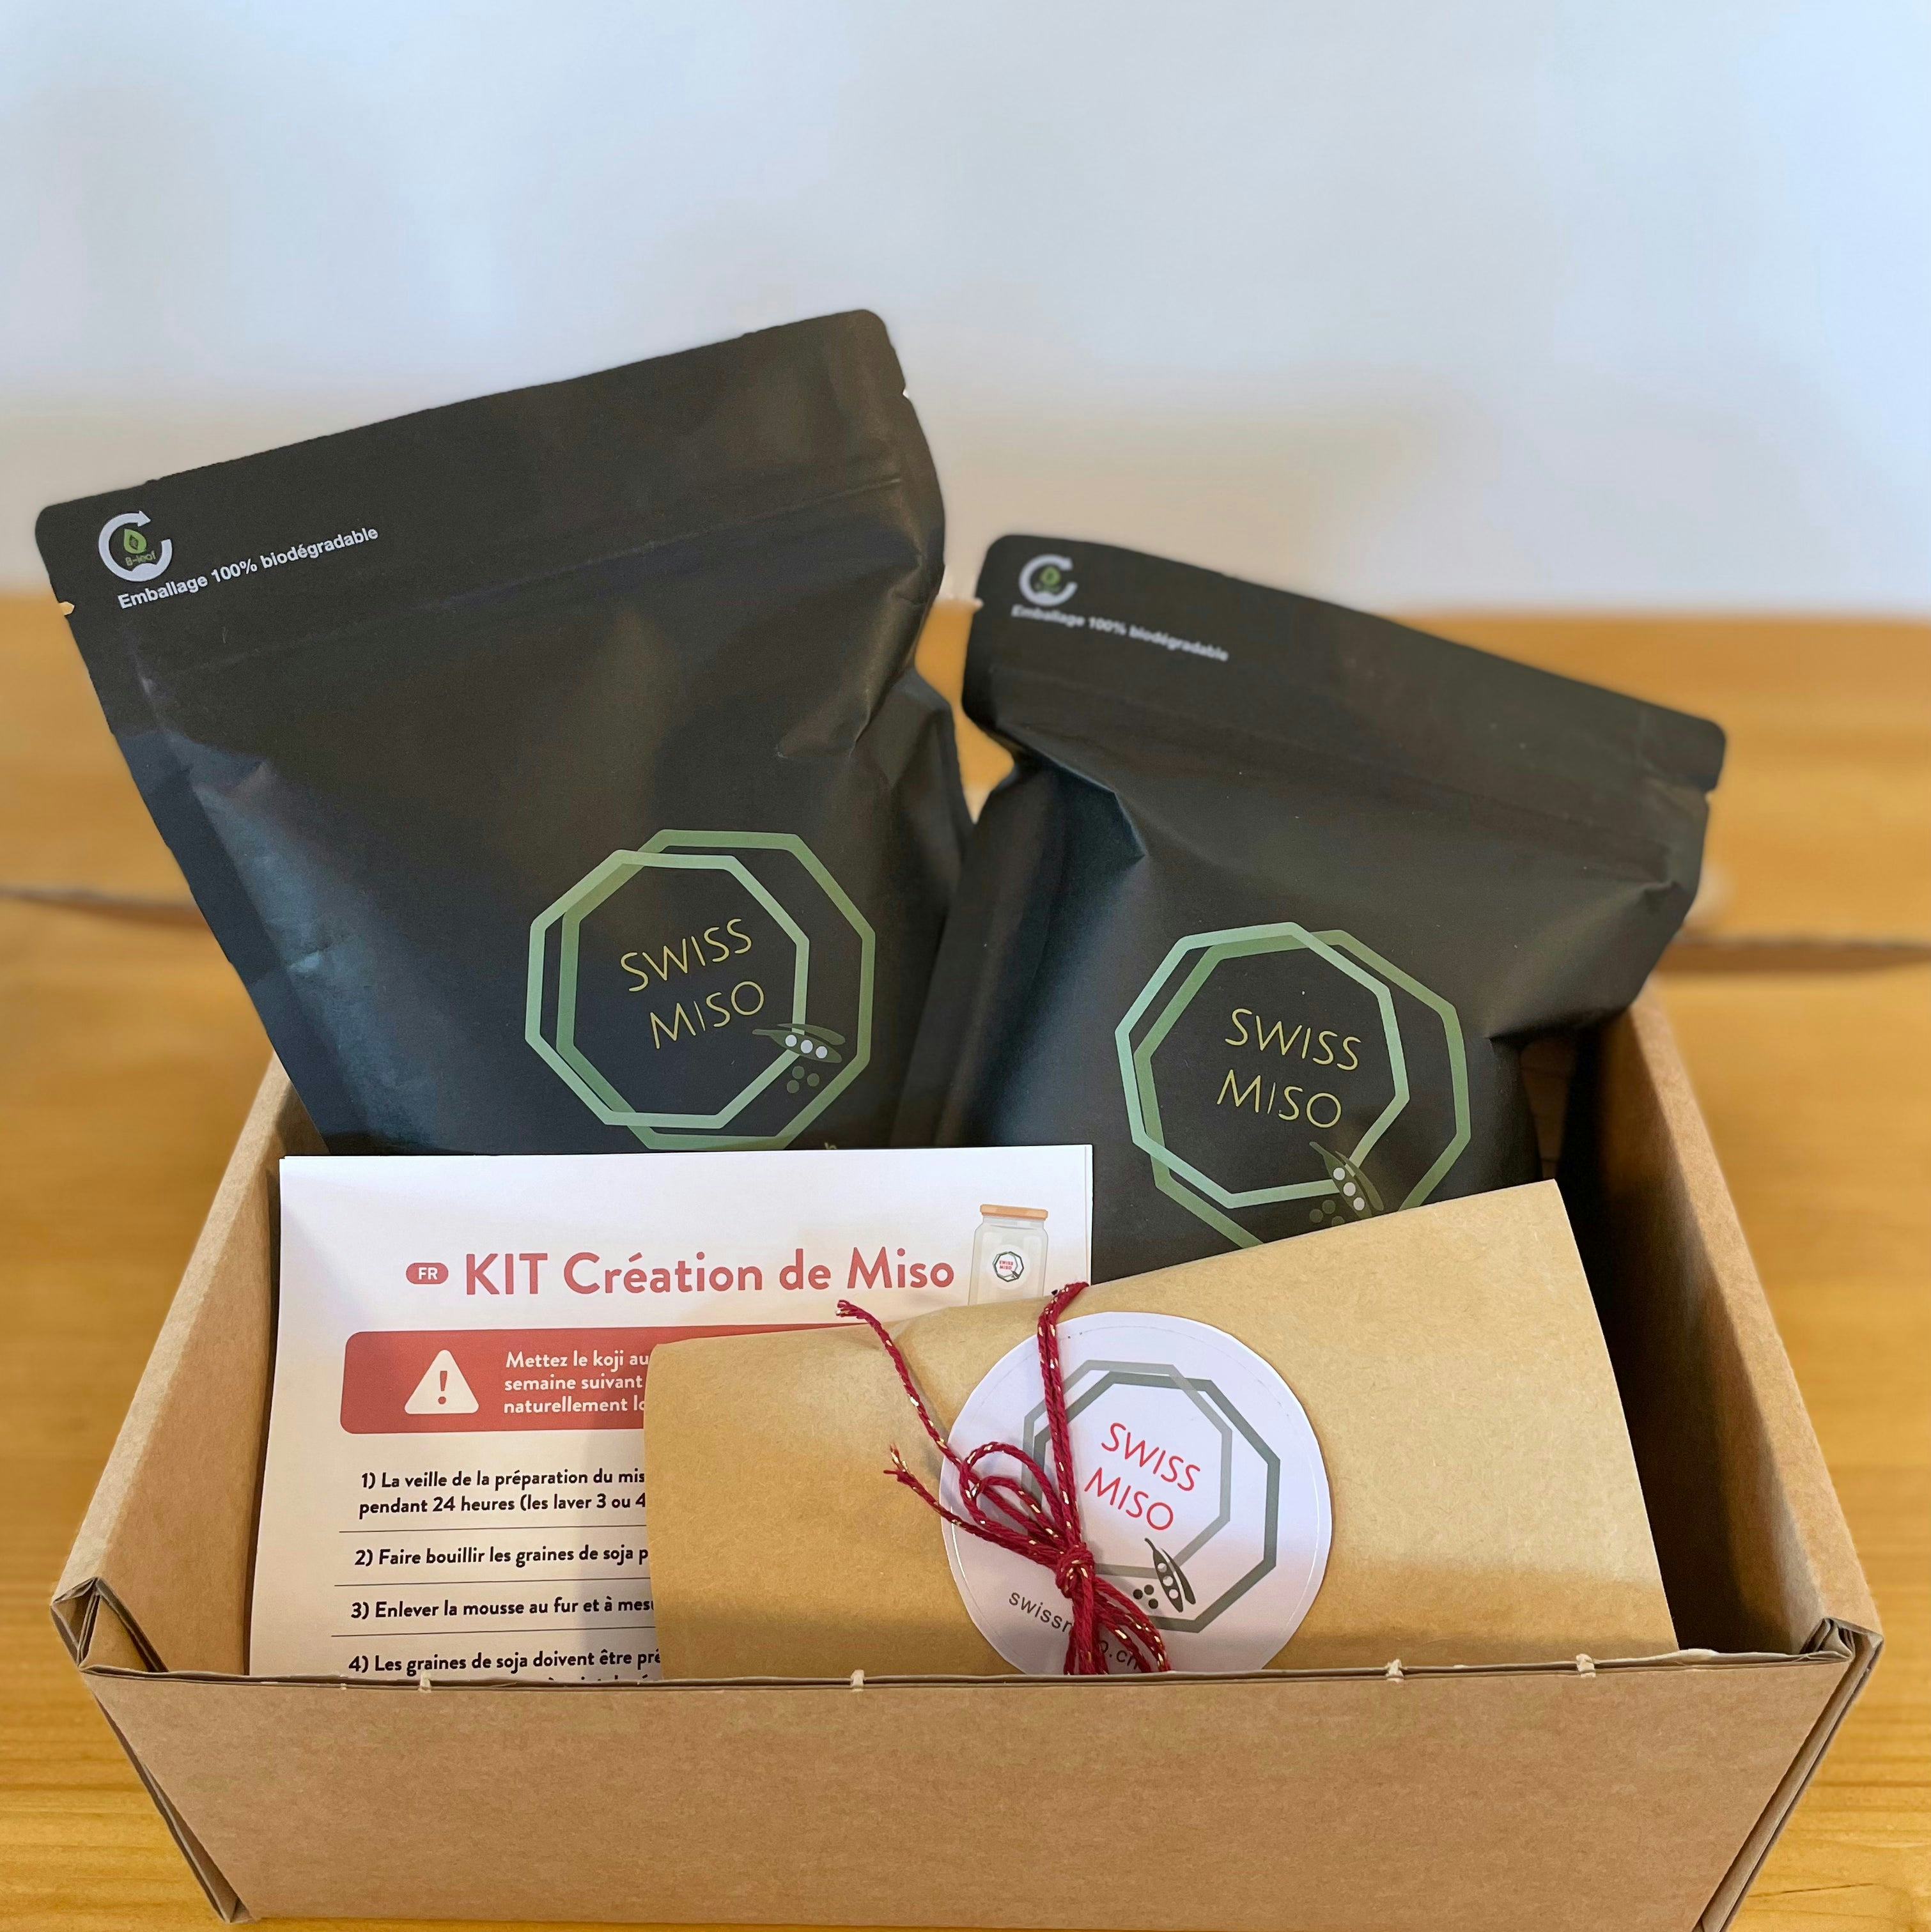 Miso Creation KIT, artisanal product for direct sale in Switzerland